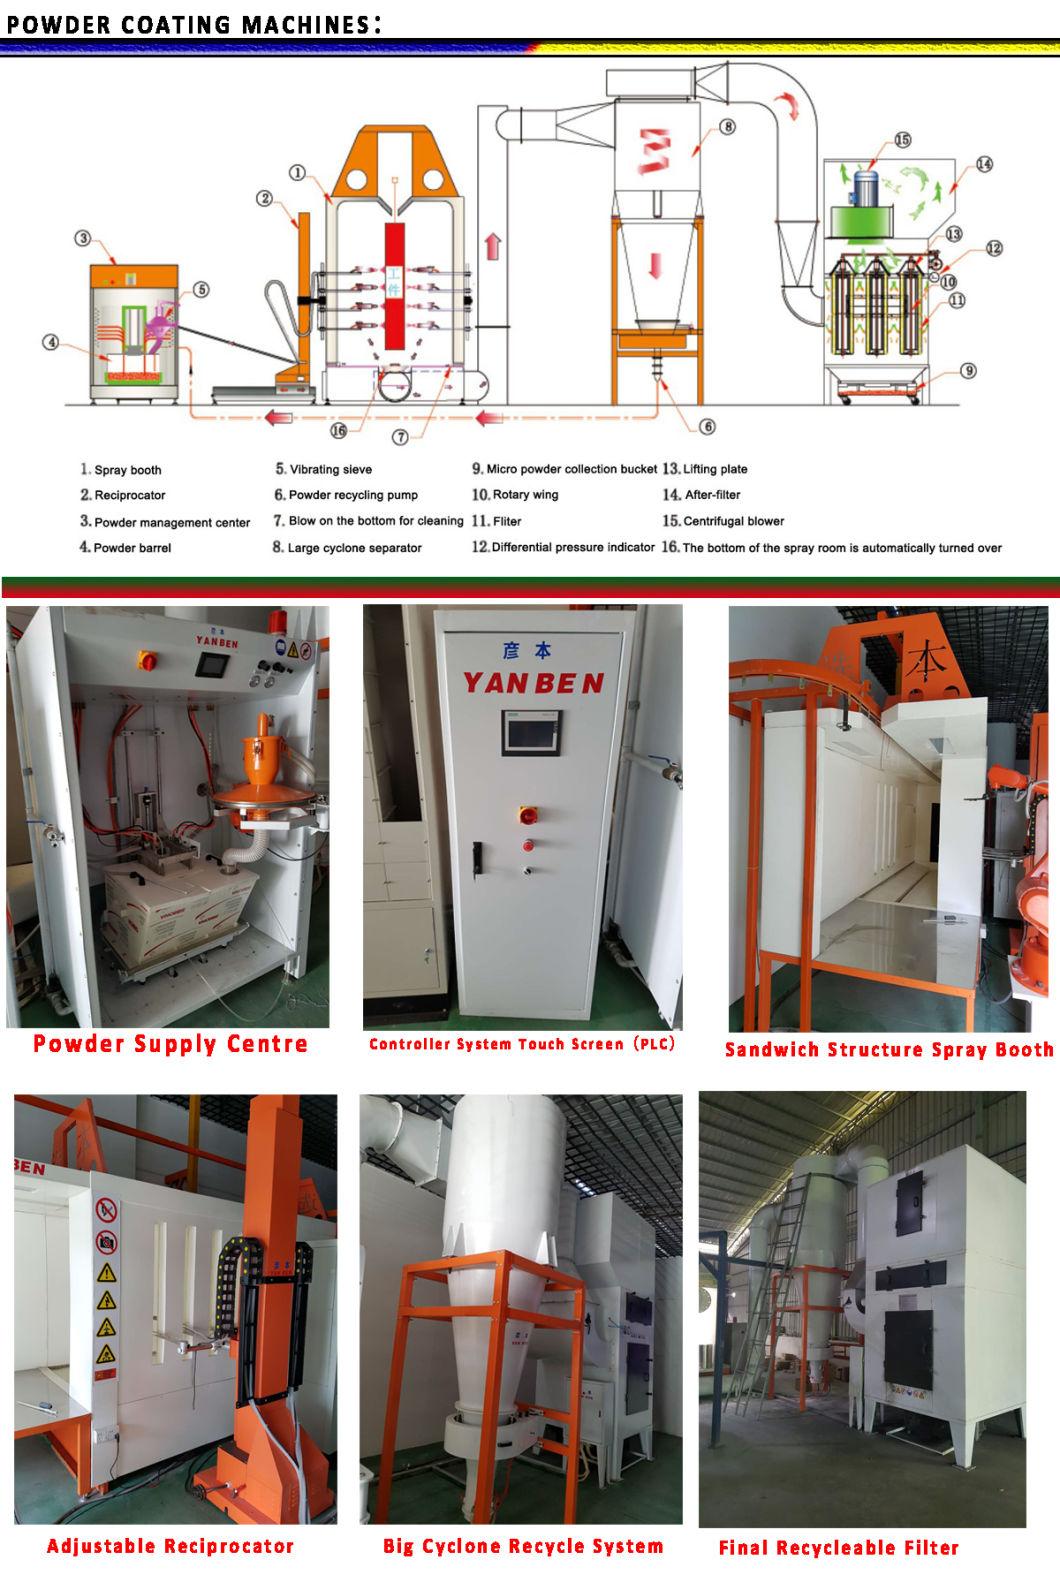 Vertical Reciprocator for Automatic Powder Coating Line